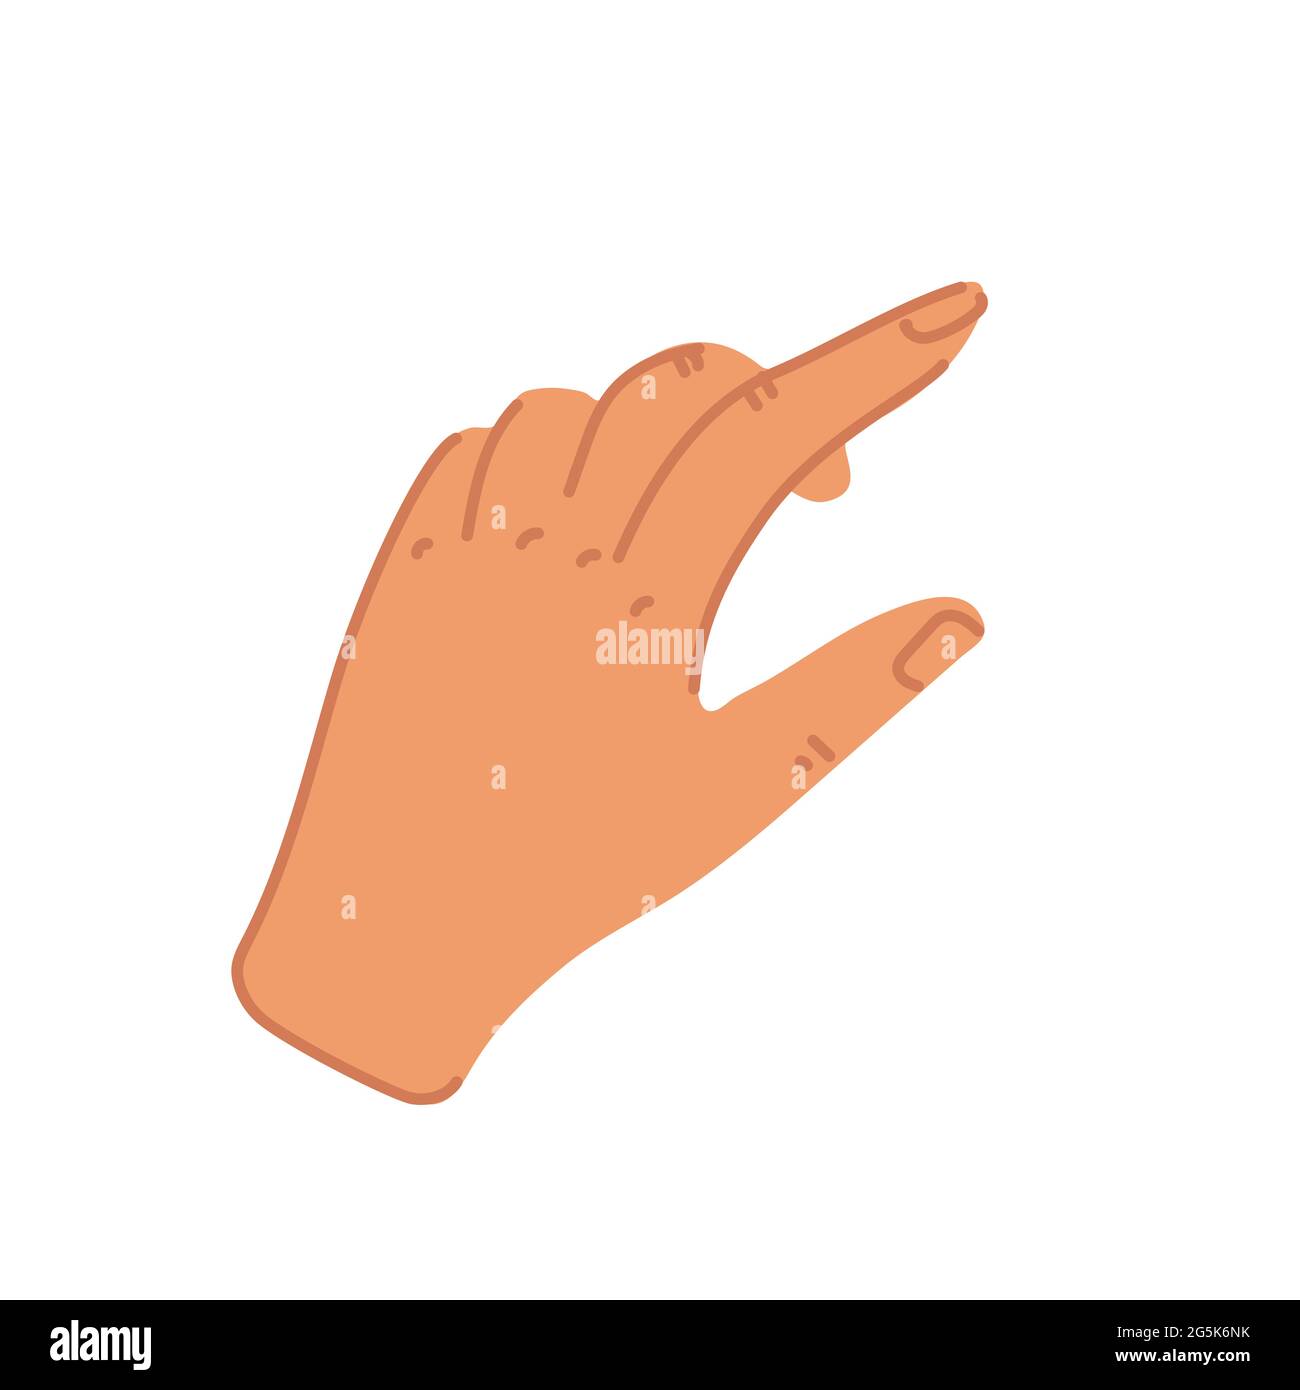 Hand with swiping index finger in flat style. Swipe up or press button icon. Flat cartoon style vector illustration. Stock Vector